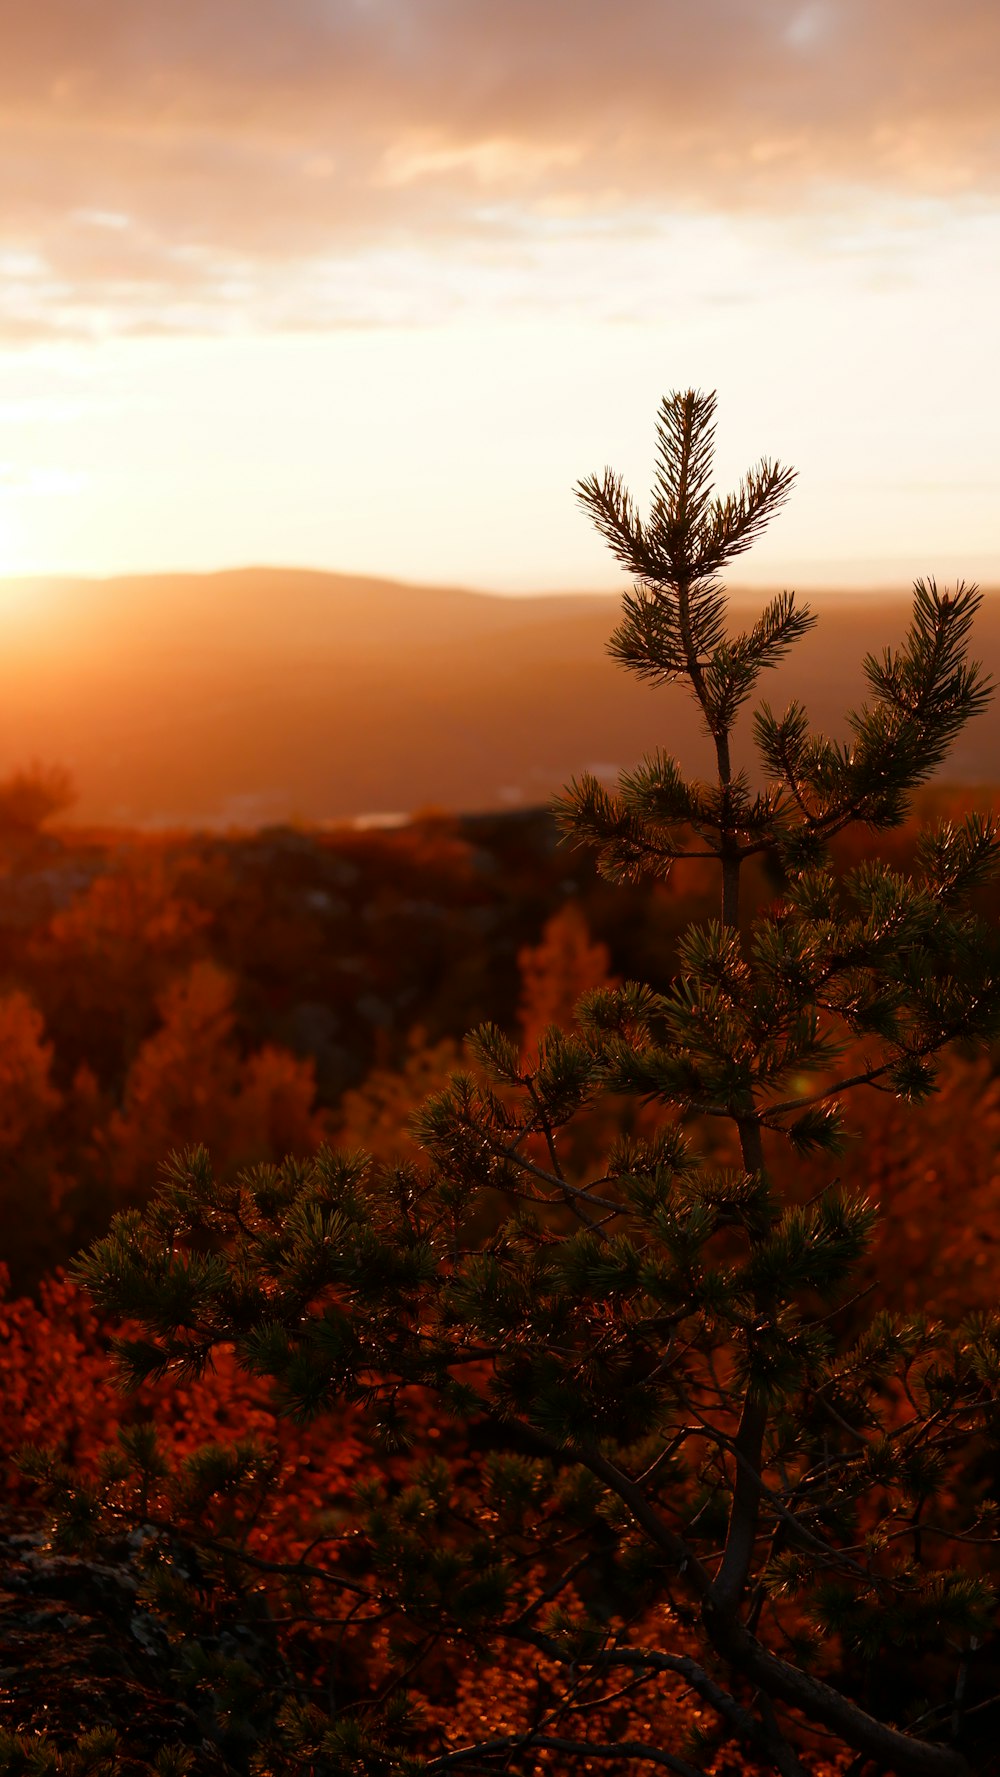 a pine tree in the foreground with a sunset in the background